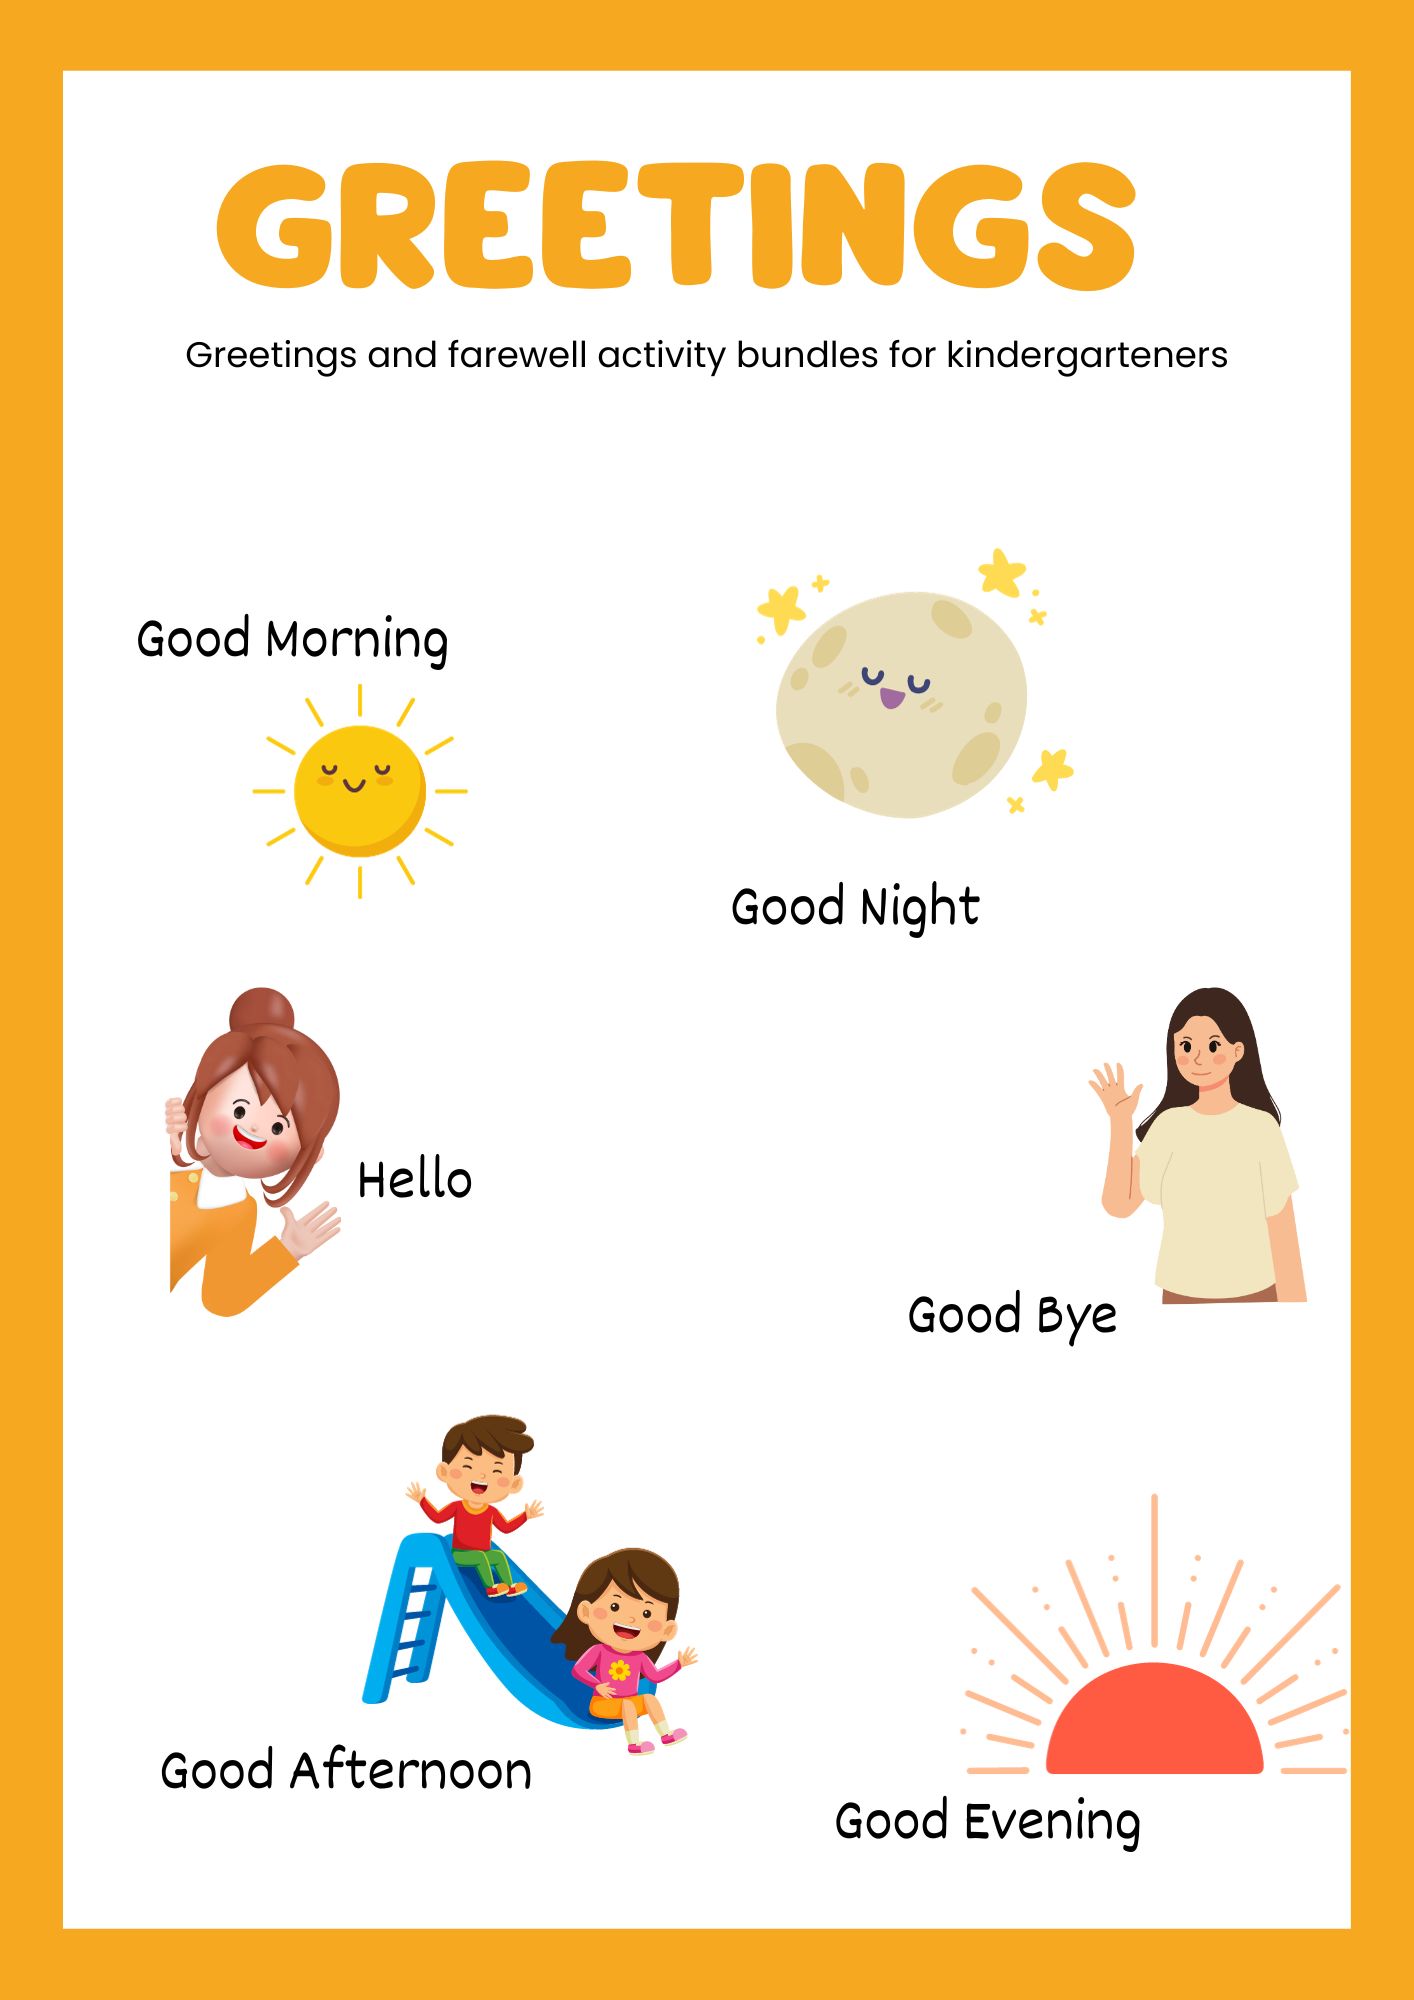 Greetings activities for kids